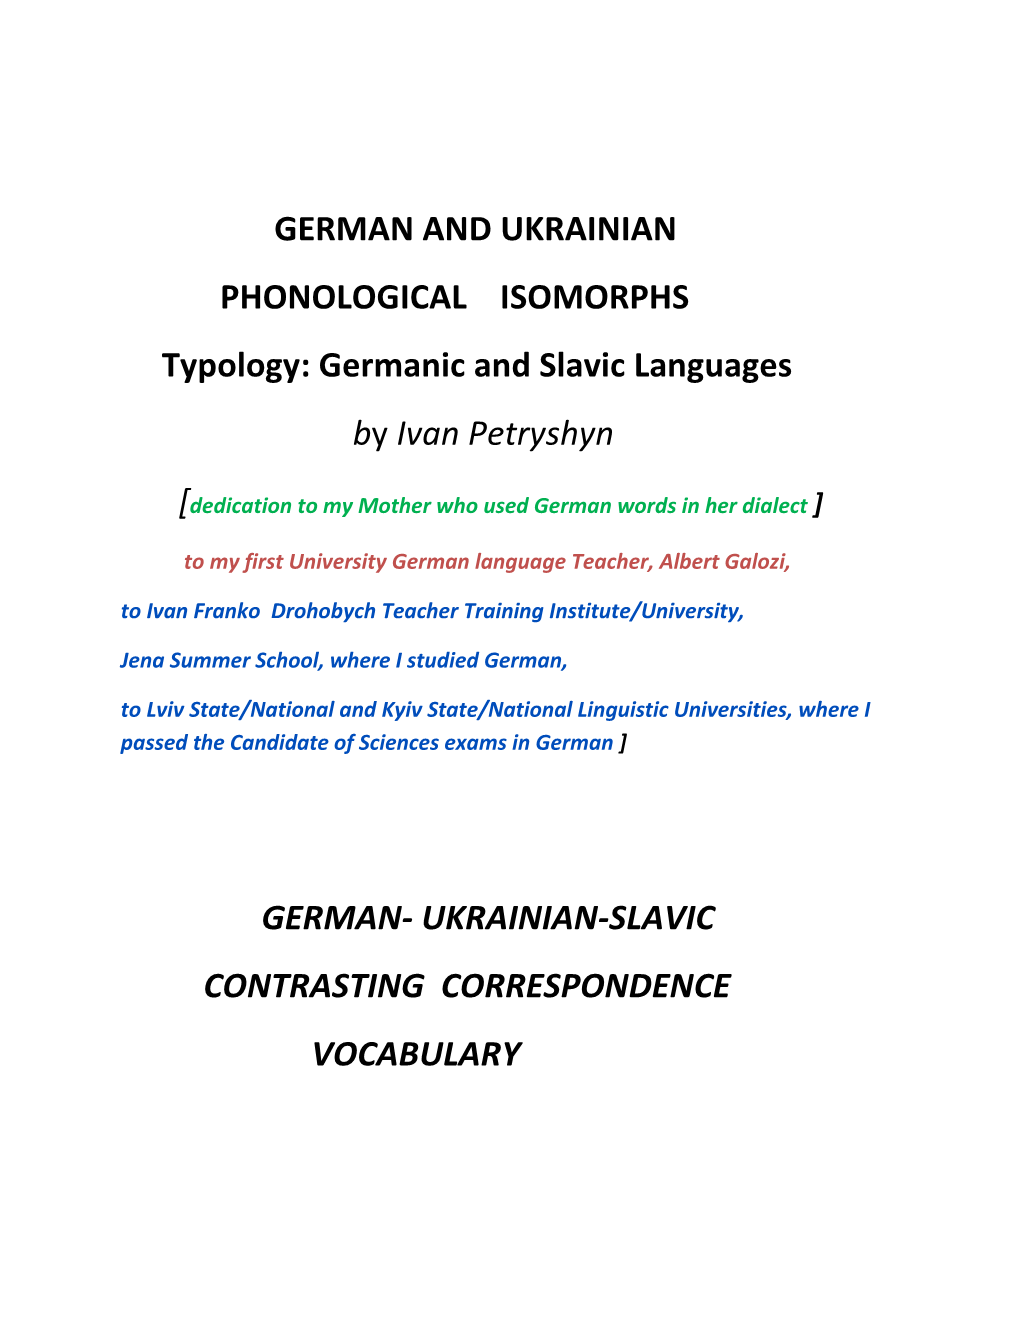 GERMAN and UKRAINIAN PHONOLOGICAL ISOMORPHS Typology: Germanic and Slavic Languages by Ivan Petryshyn